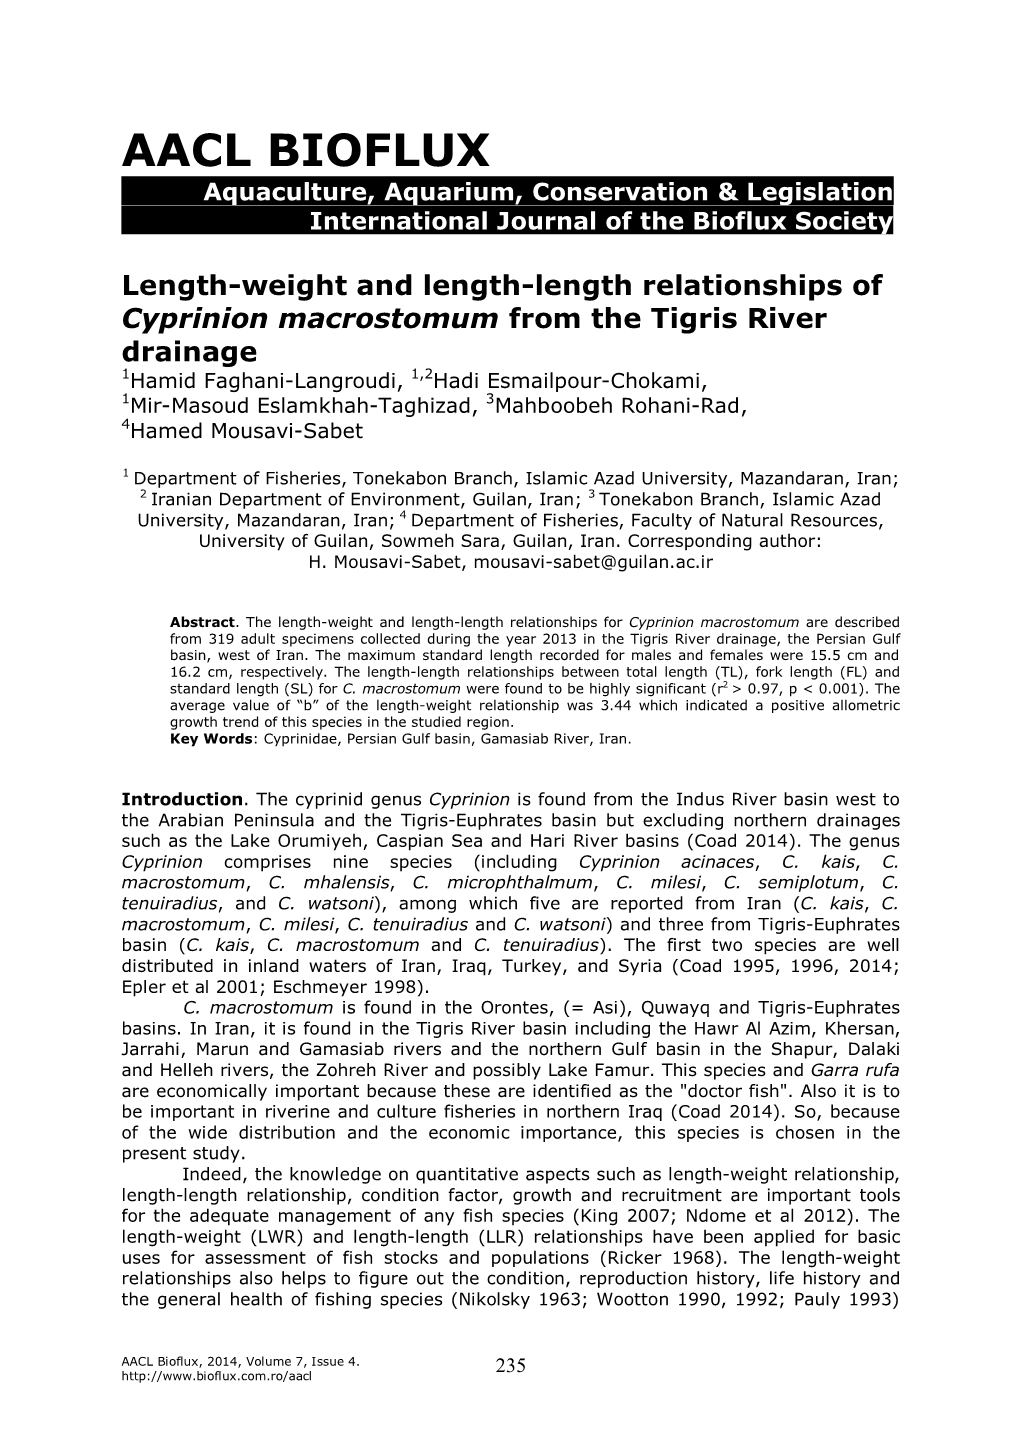 Length-Weight and Length-Length Relationships of Cyprinion